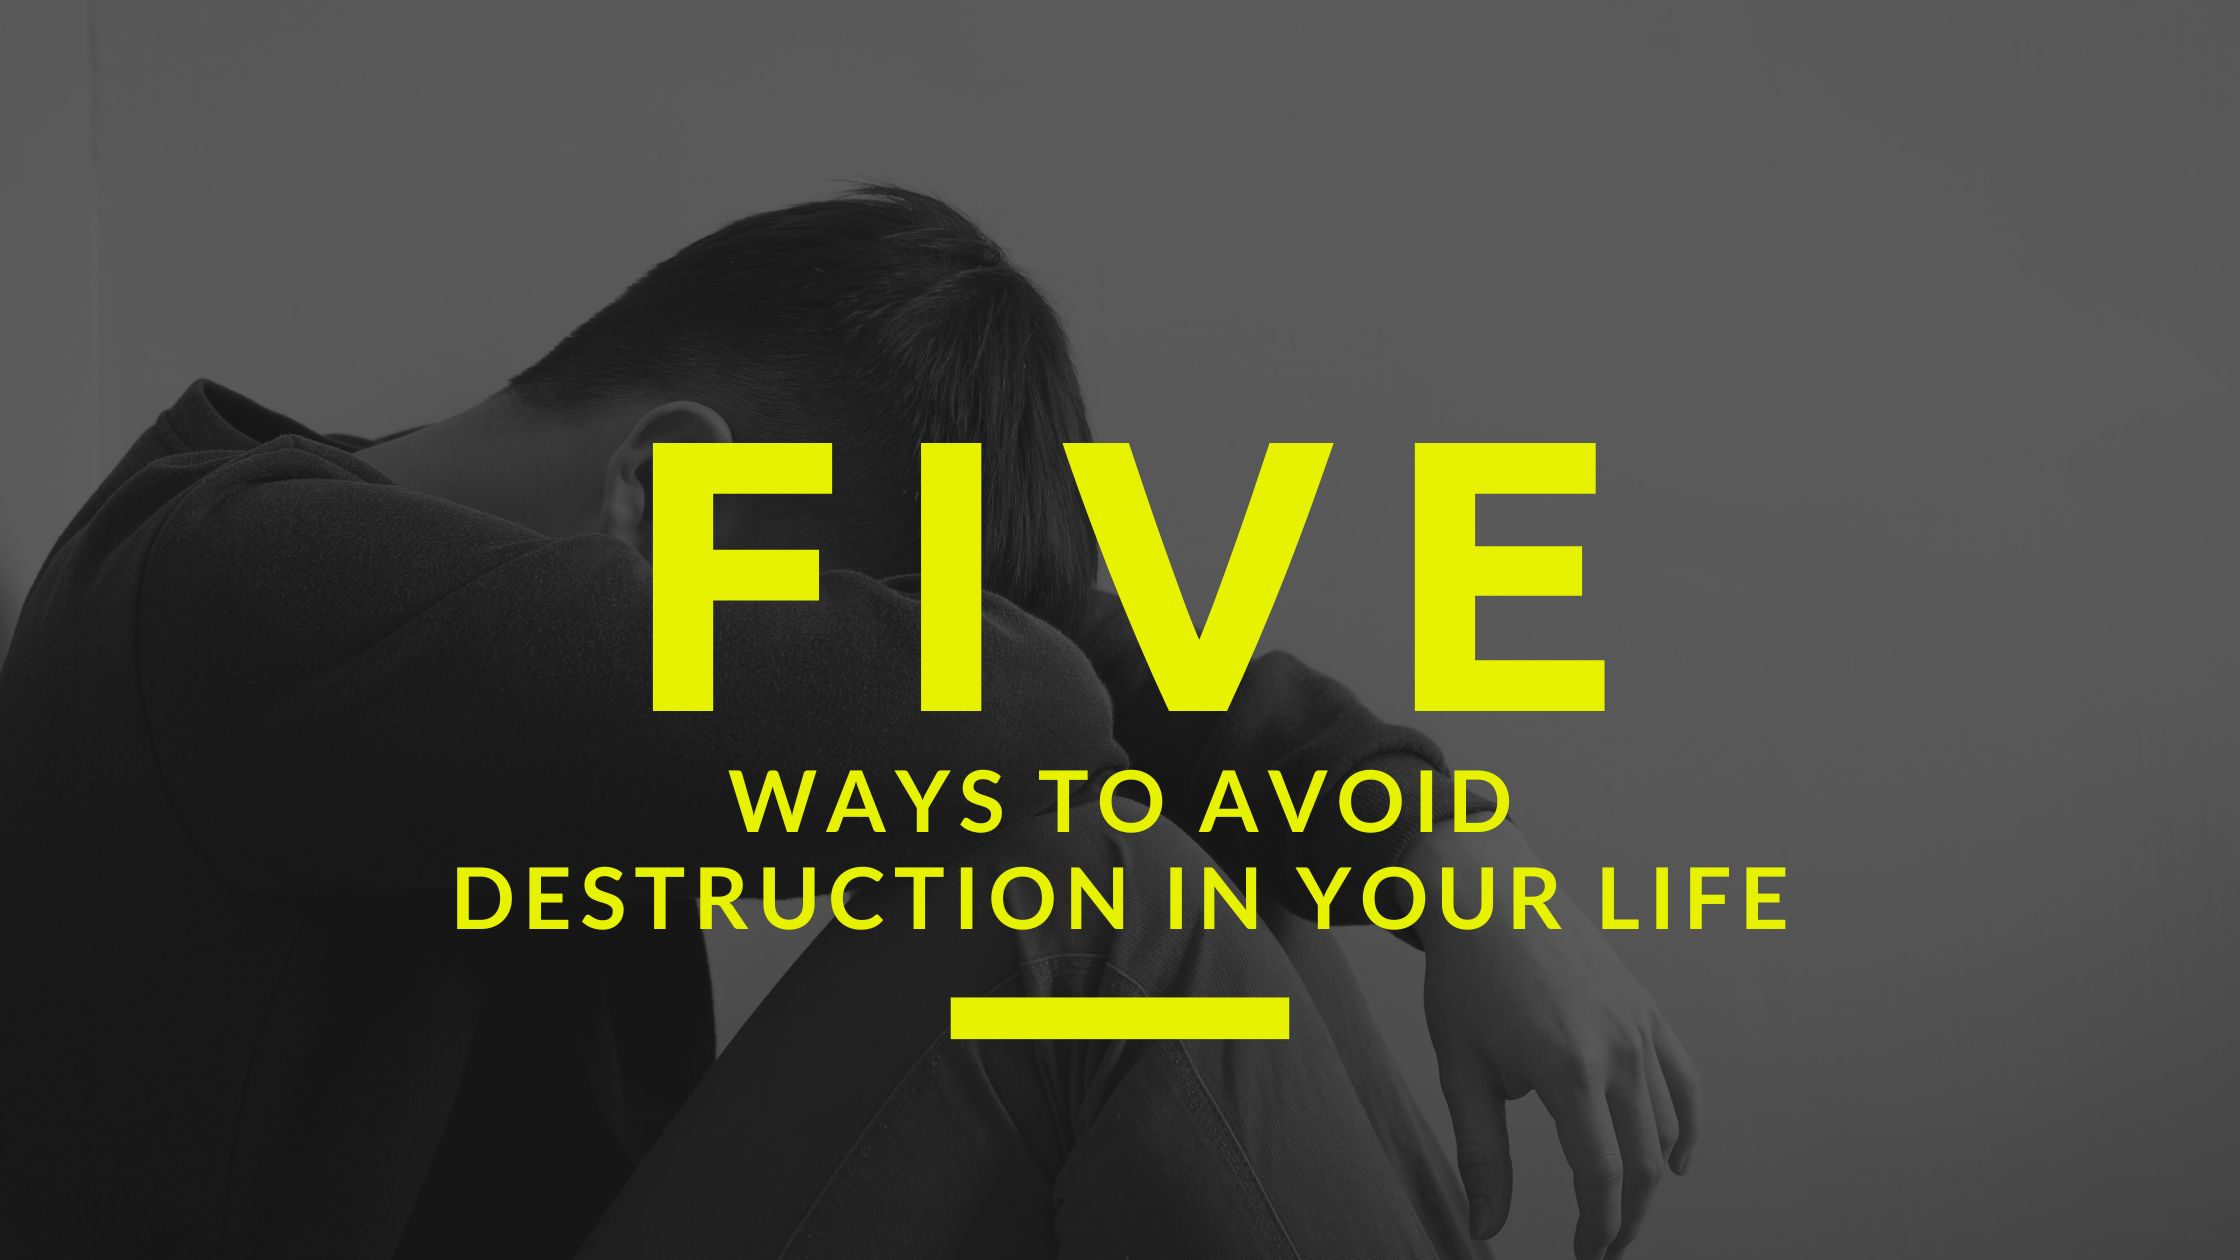 Five Ways to Avoid Destruction In Your Life